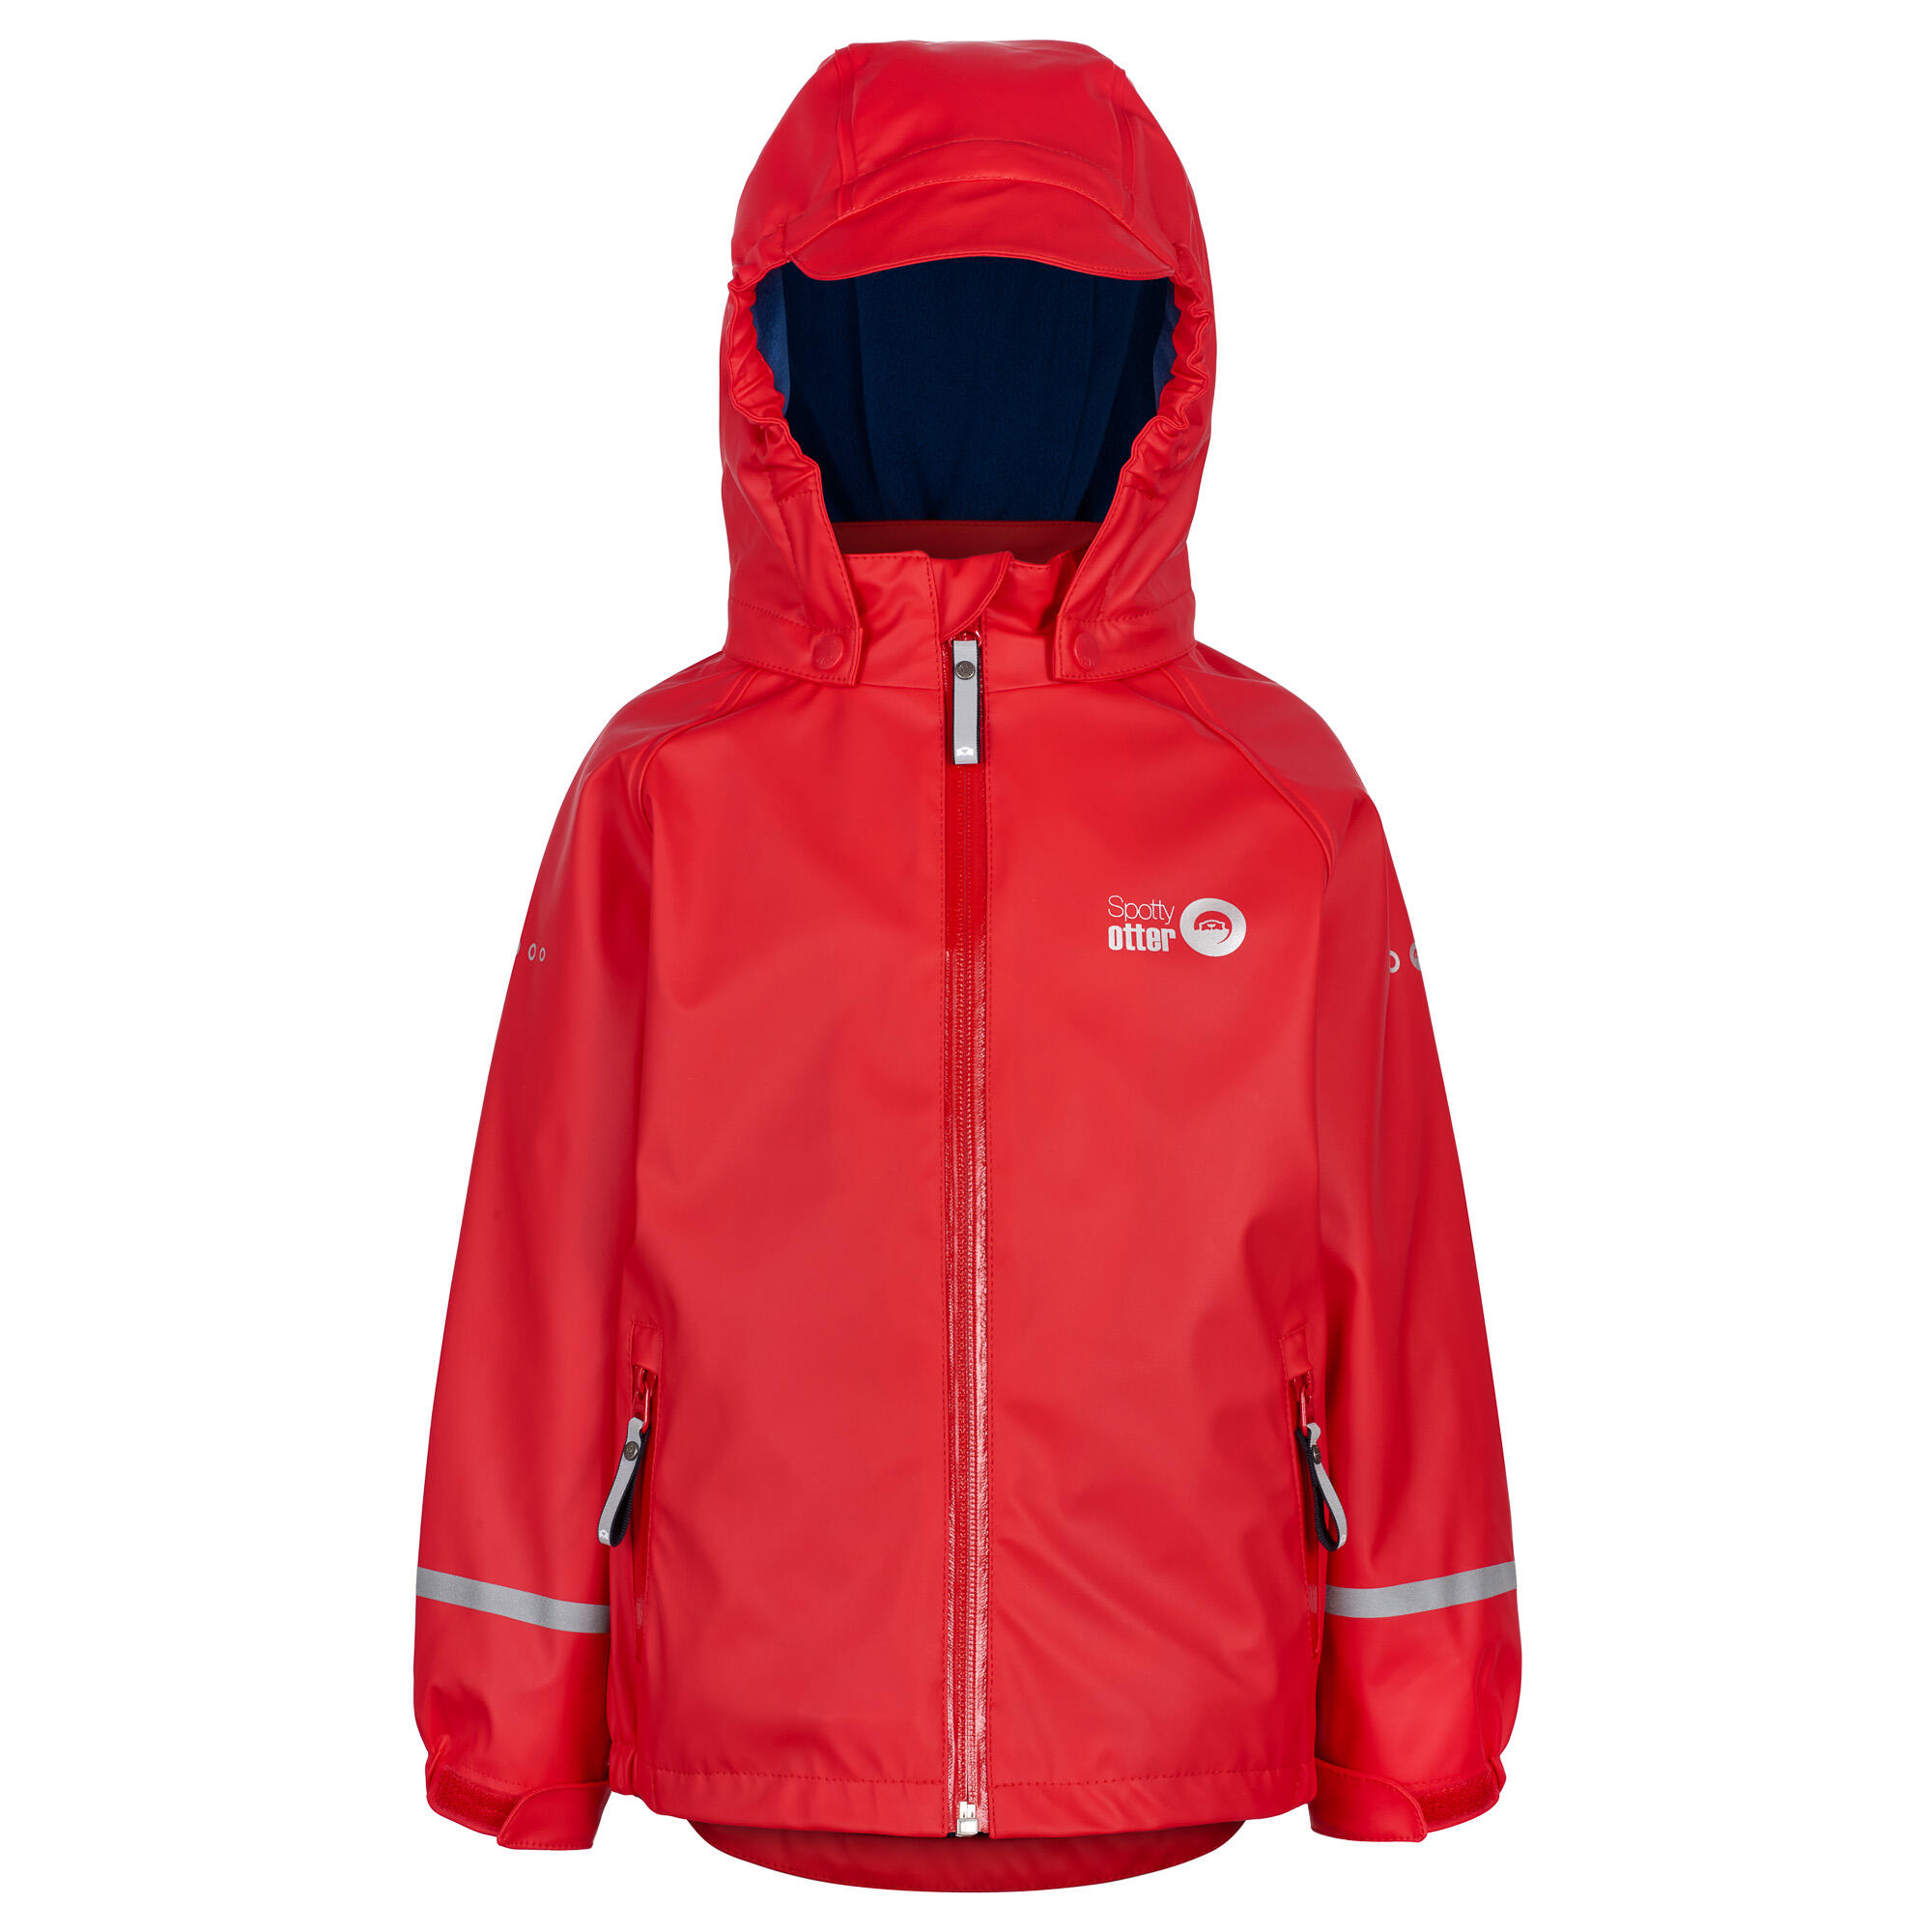 SPOTTY OTTER Spotty Otter Forest Leader Insulated PU Jacket Red